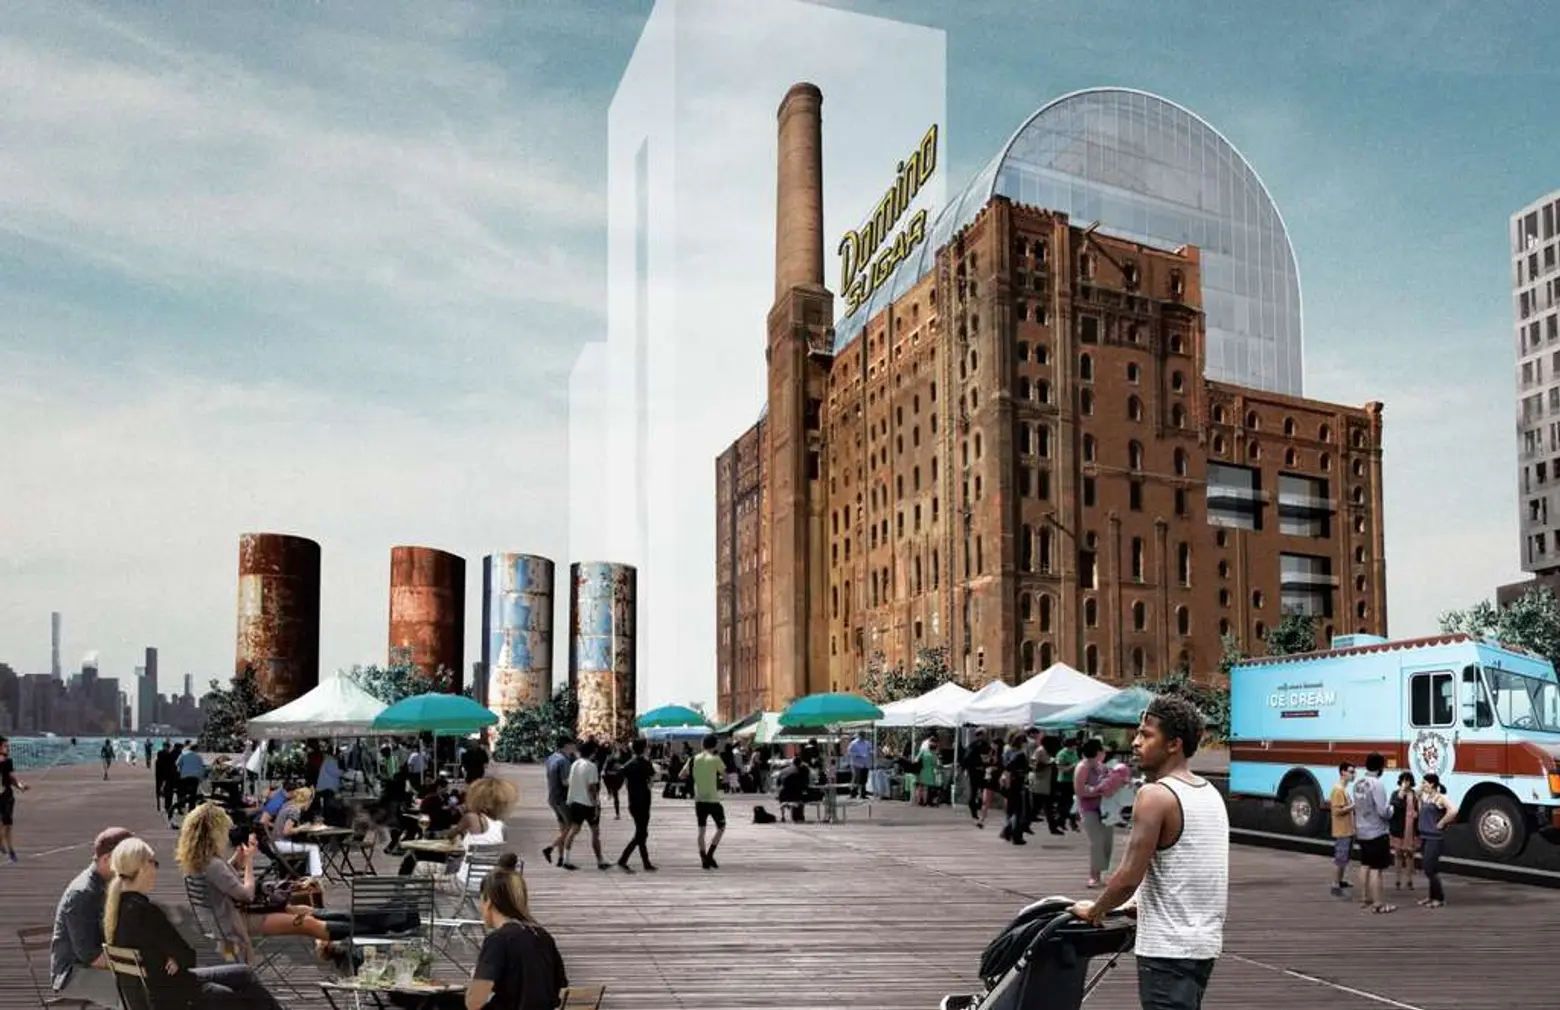 PAU’s revised Domino Sugar Factory proposal gets the green light from Landmarks